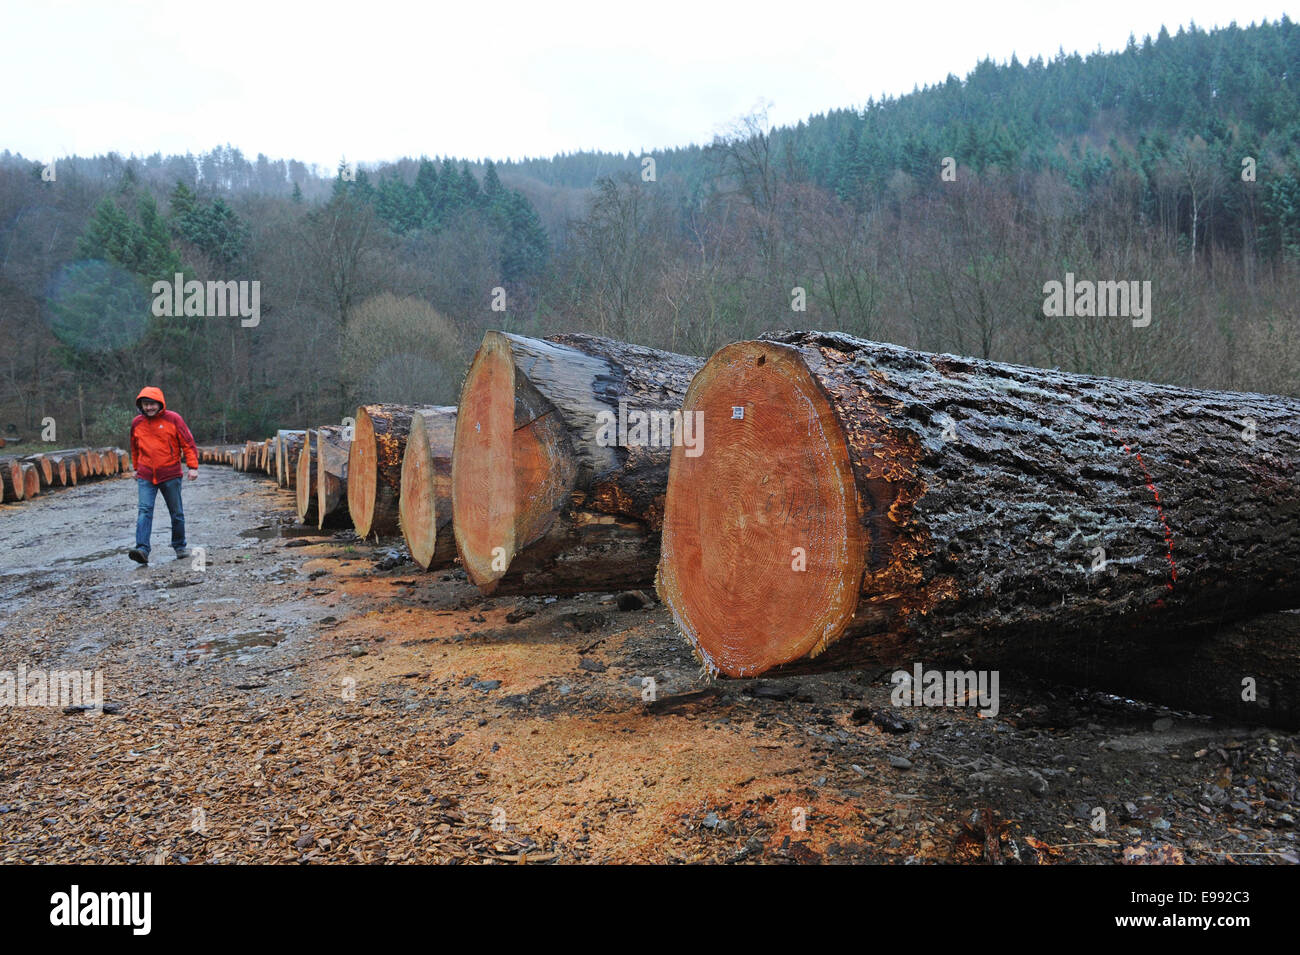 View of a r wood yard in the Black Forest near the mountain Belchen, southern Germany, on Dec.,16., 2011. Stock Photo